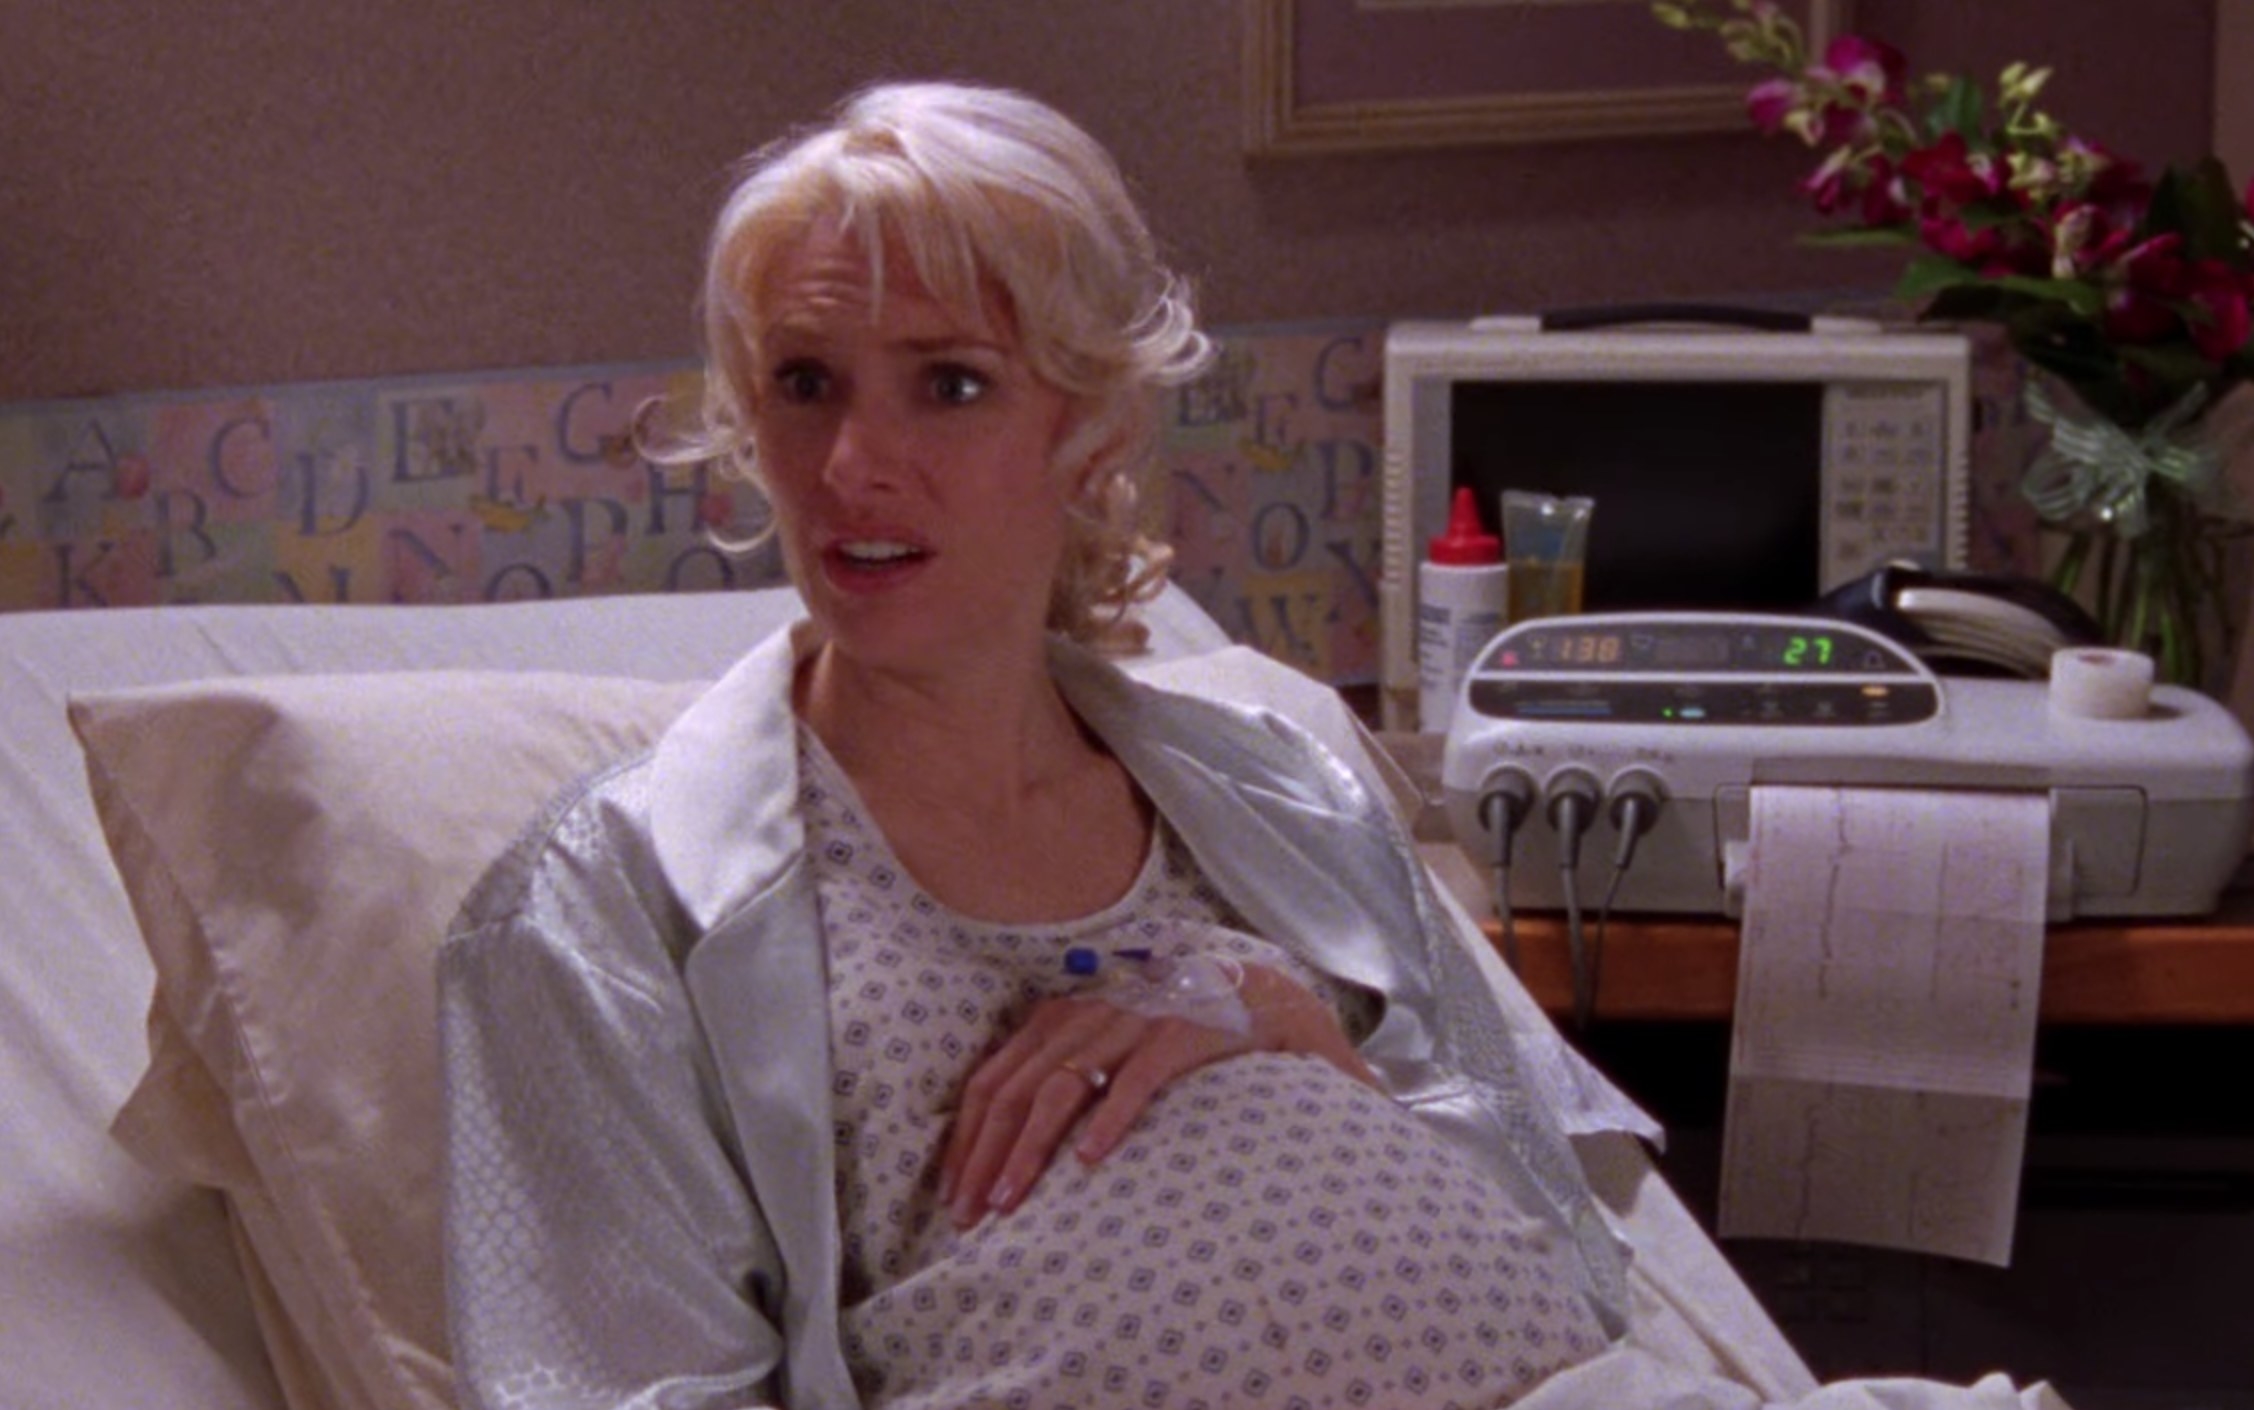 Sherry pregnant in a hospital bed